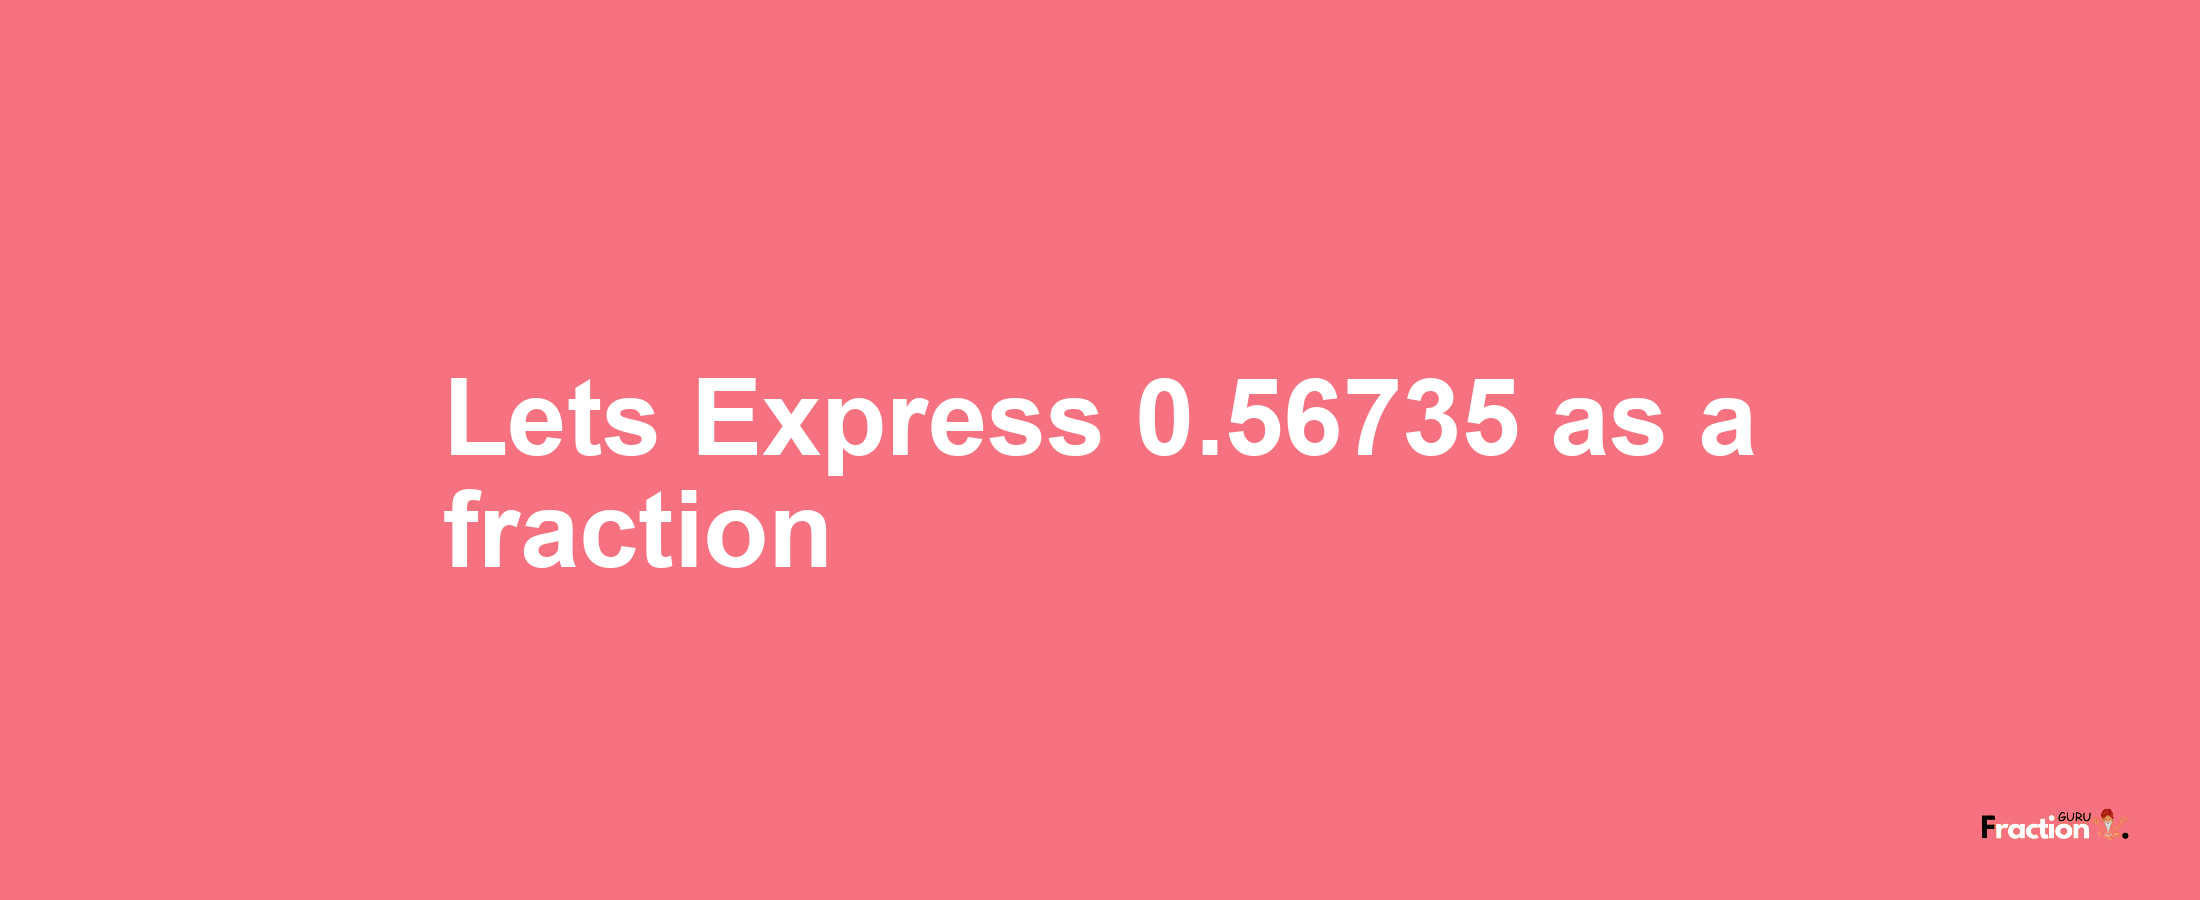 Lets Express 0.56735 as afraction